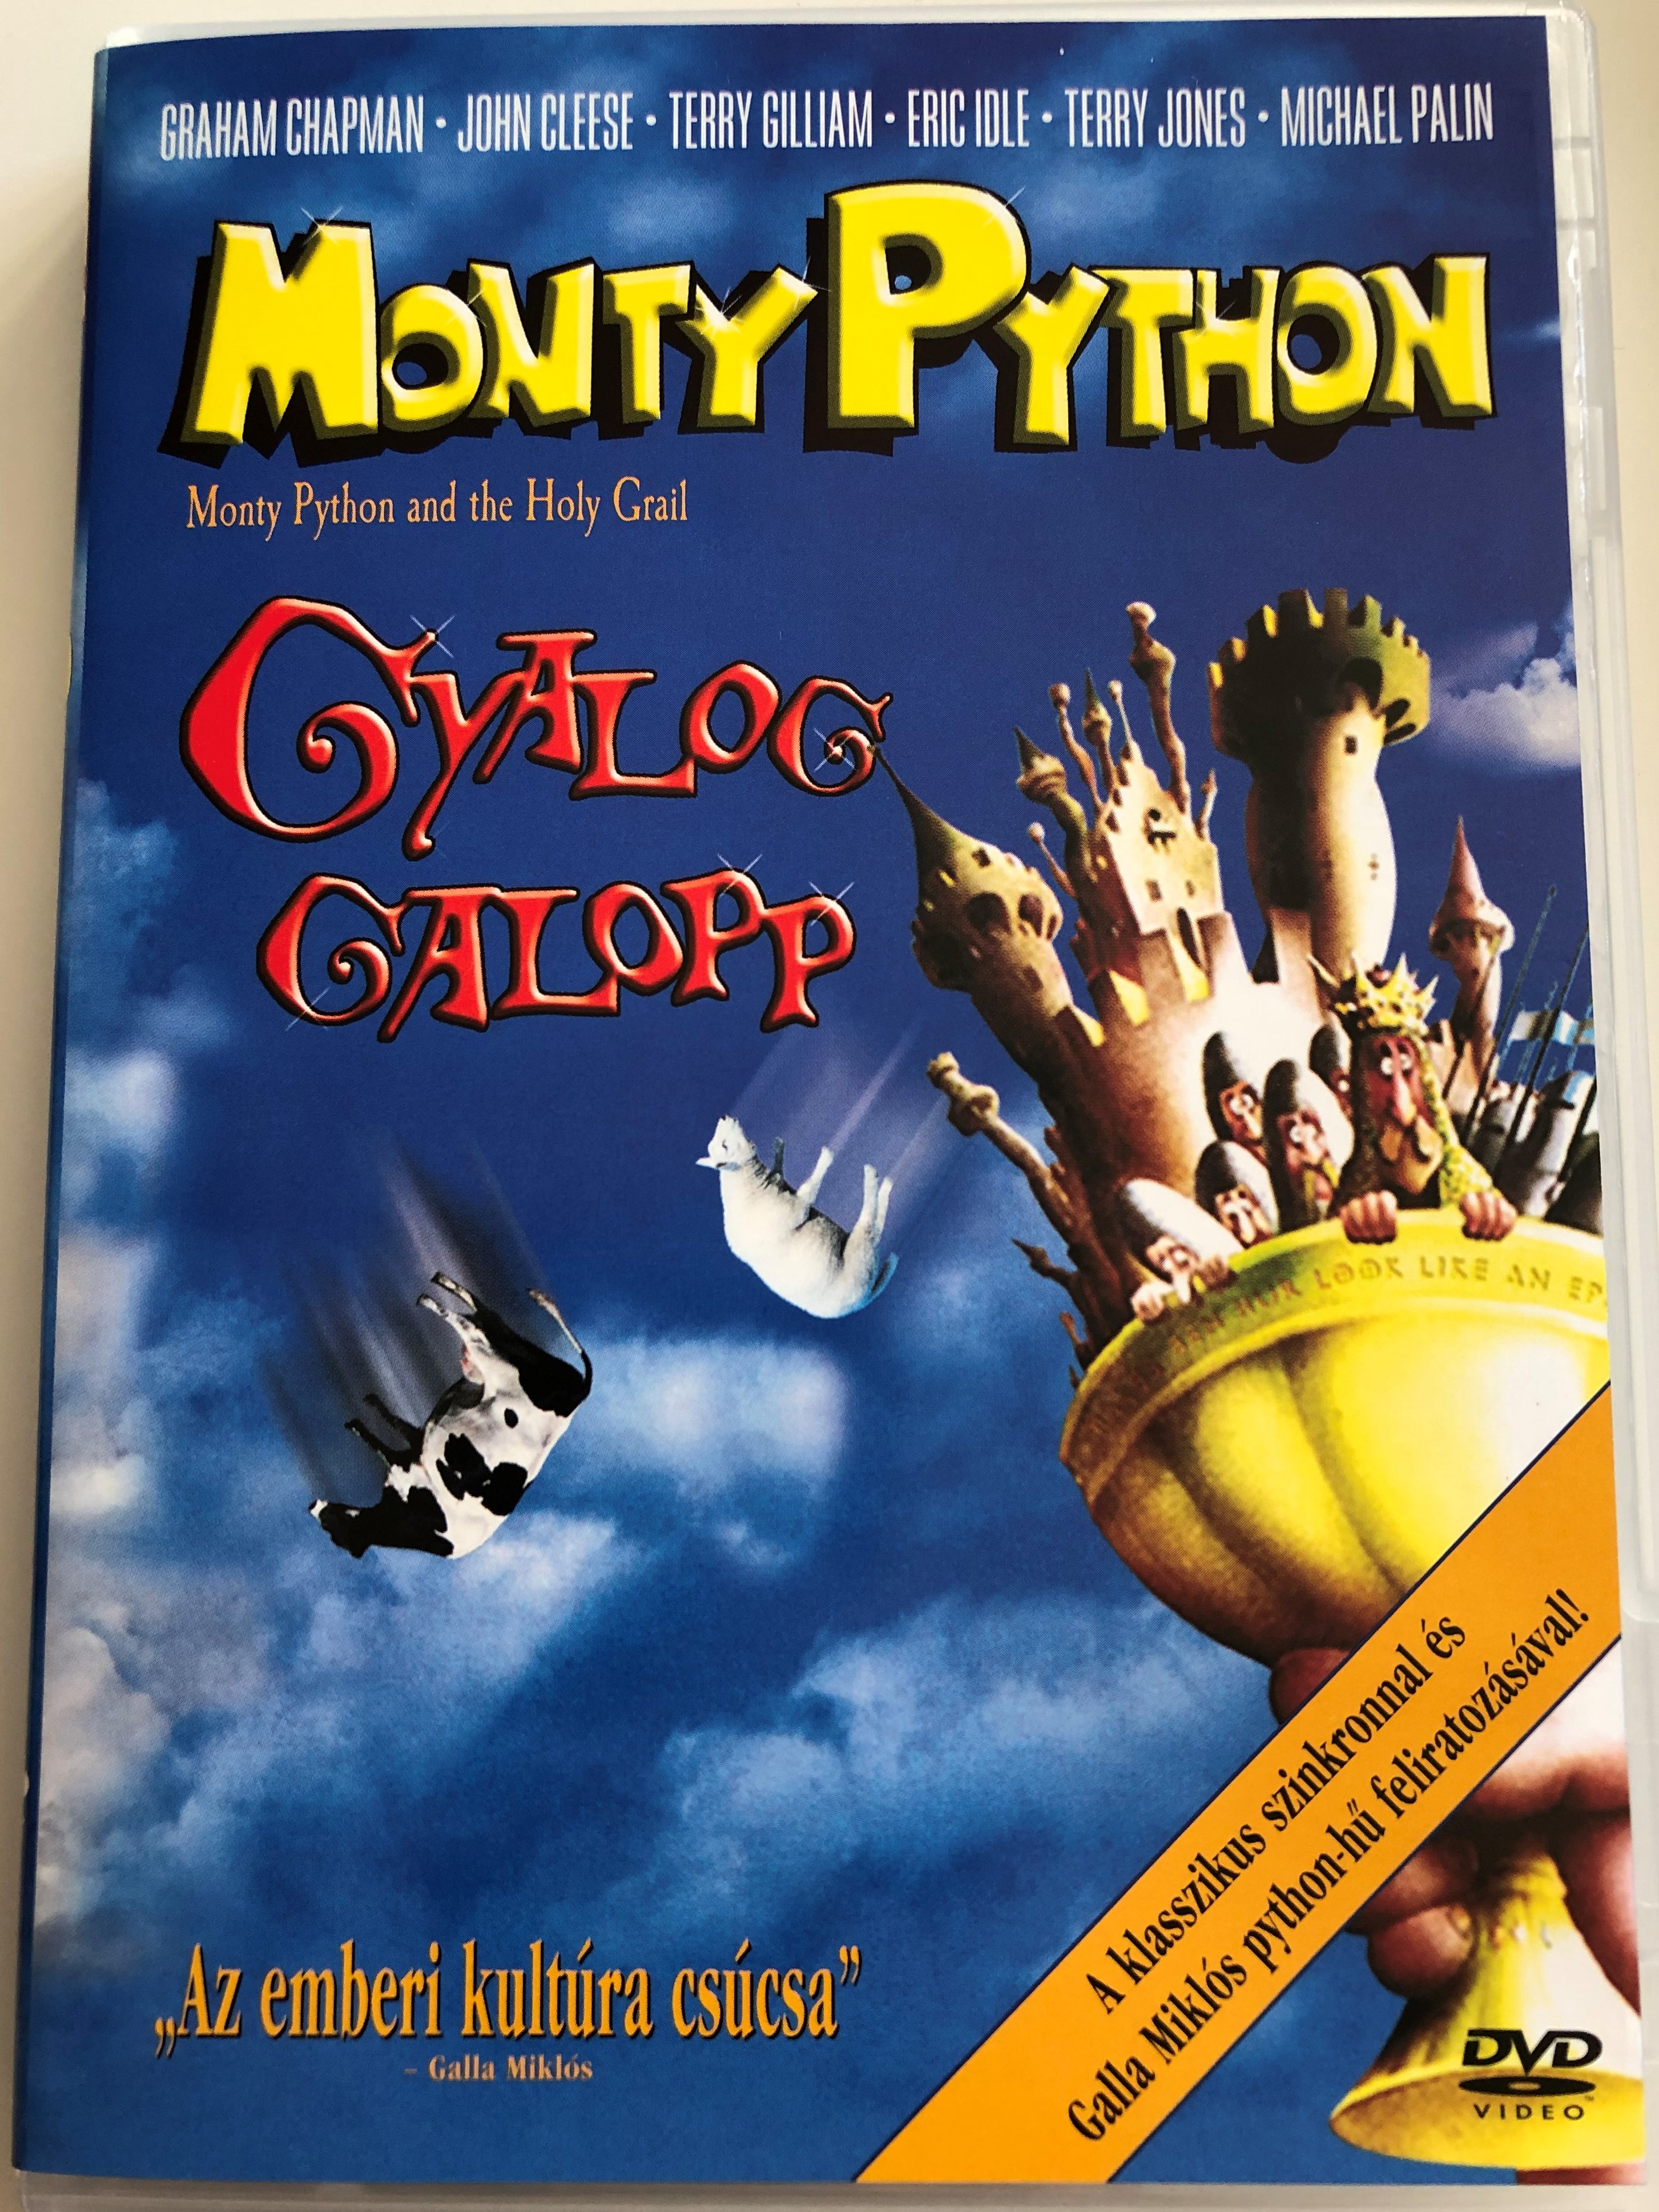 monty-python-and-the-holy-grail-dvd-monty-python-gyalog-galopp-directed-by-terry-gilliam-terry-jones-1-.jpg